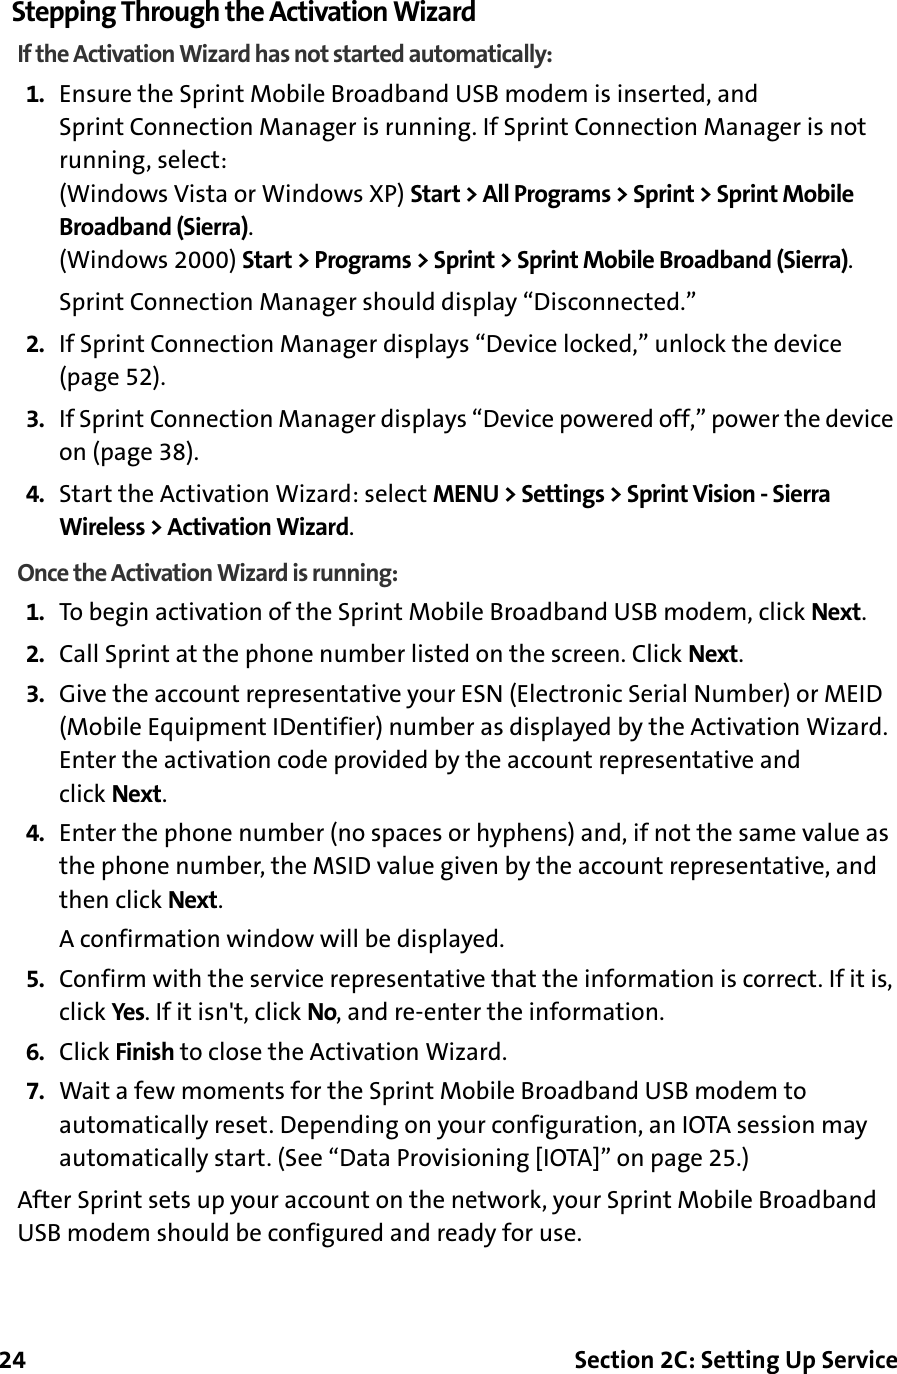 24 Section 2C: Setting Up ServiceStepping Through the Activation WizardIf the Activation Wizard has not started automatically:1. Ensure the Sprint Mobile Broadband USB modem is inserted, and Sprint Connection Manager is running. If Sprint Connection Manager is not running, select:(Windows Vista or Windows XP) Start &gt; All Programs &gt; Sprint &gt; Sprint Mobile Broadband (Sierra).(Windows 2000) Start &gt; Programs &gt; Sprint &gt; Sprint Mobile Broadband (Sierra).Sprint Connection Manager should display “Disconnected.”2. If Sprint Connection Manager displays “Device locked,” unlock the device (page 52).3. If Sprint Connection Manager displays “Device powered off,” power the device on (page 38).4. Start the Activation Wizard: select MENU &gt; Settings &gt; Sprint Vision - Sierra Wireless &gt; Activation Wizard.Once the Activation Wizard is running:1. To begin activation of the Sprint Mobile Broadband USB modem, click Next.2. Call Sprint at the phone number listed on the screen. Click Next.3. Give the account representative your ESN (Electronic Serial Number) or MEID (Mobile Equipment IDentifier) number as displayed by the Activation Wizard. Enter the activation code provided by the account representative and click Next.4. Enter the phone number (no spaces or hyphens) and, if not the same value as the phone number, the MSID value given by the account representative, and then click Next.A confirmation window will be displayed.5. Confirm with the service representative that the information is correct. If it is, click Yes. If it isn&apos;t, click No, and re-enter the information.6. Click Finish to close the Activation Wizard.7. Wait a few moments for the Sprint Mobile Broadband USB modem to automatically reset. Depending on your configuration, an IOTA session may automatically start. (See “Data Provisioning [IOTA]” on page 25.)After Sprint sets up your account on the network, your Sprint Mobile Broadband USB modem should be configured and ready for use.